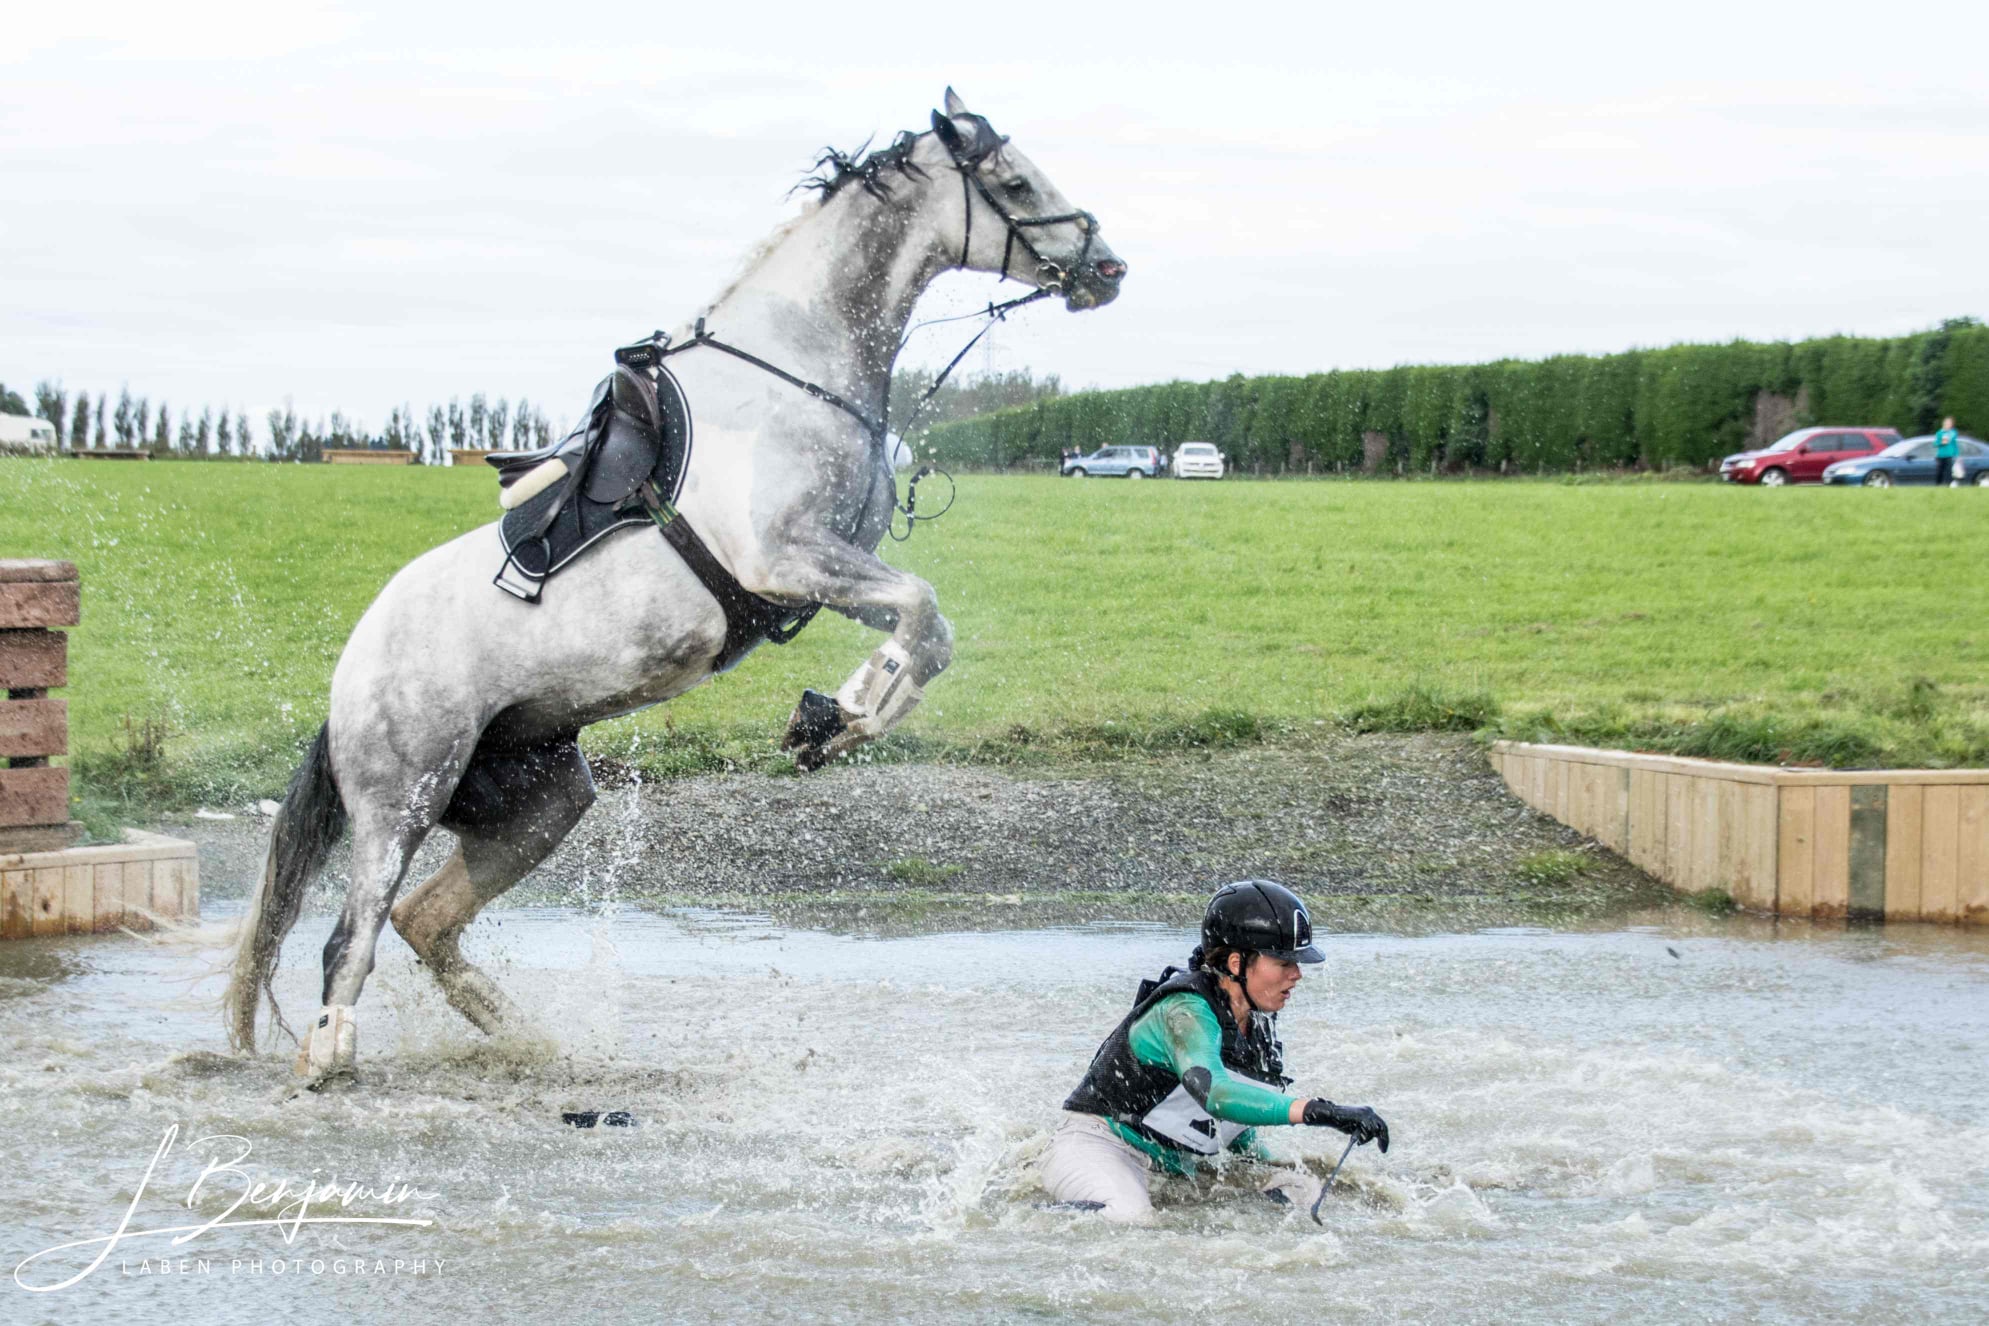 Re: Wet and Muddy Equestrians 26037-re--wet-and-muddy-equestrians.jpg